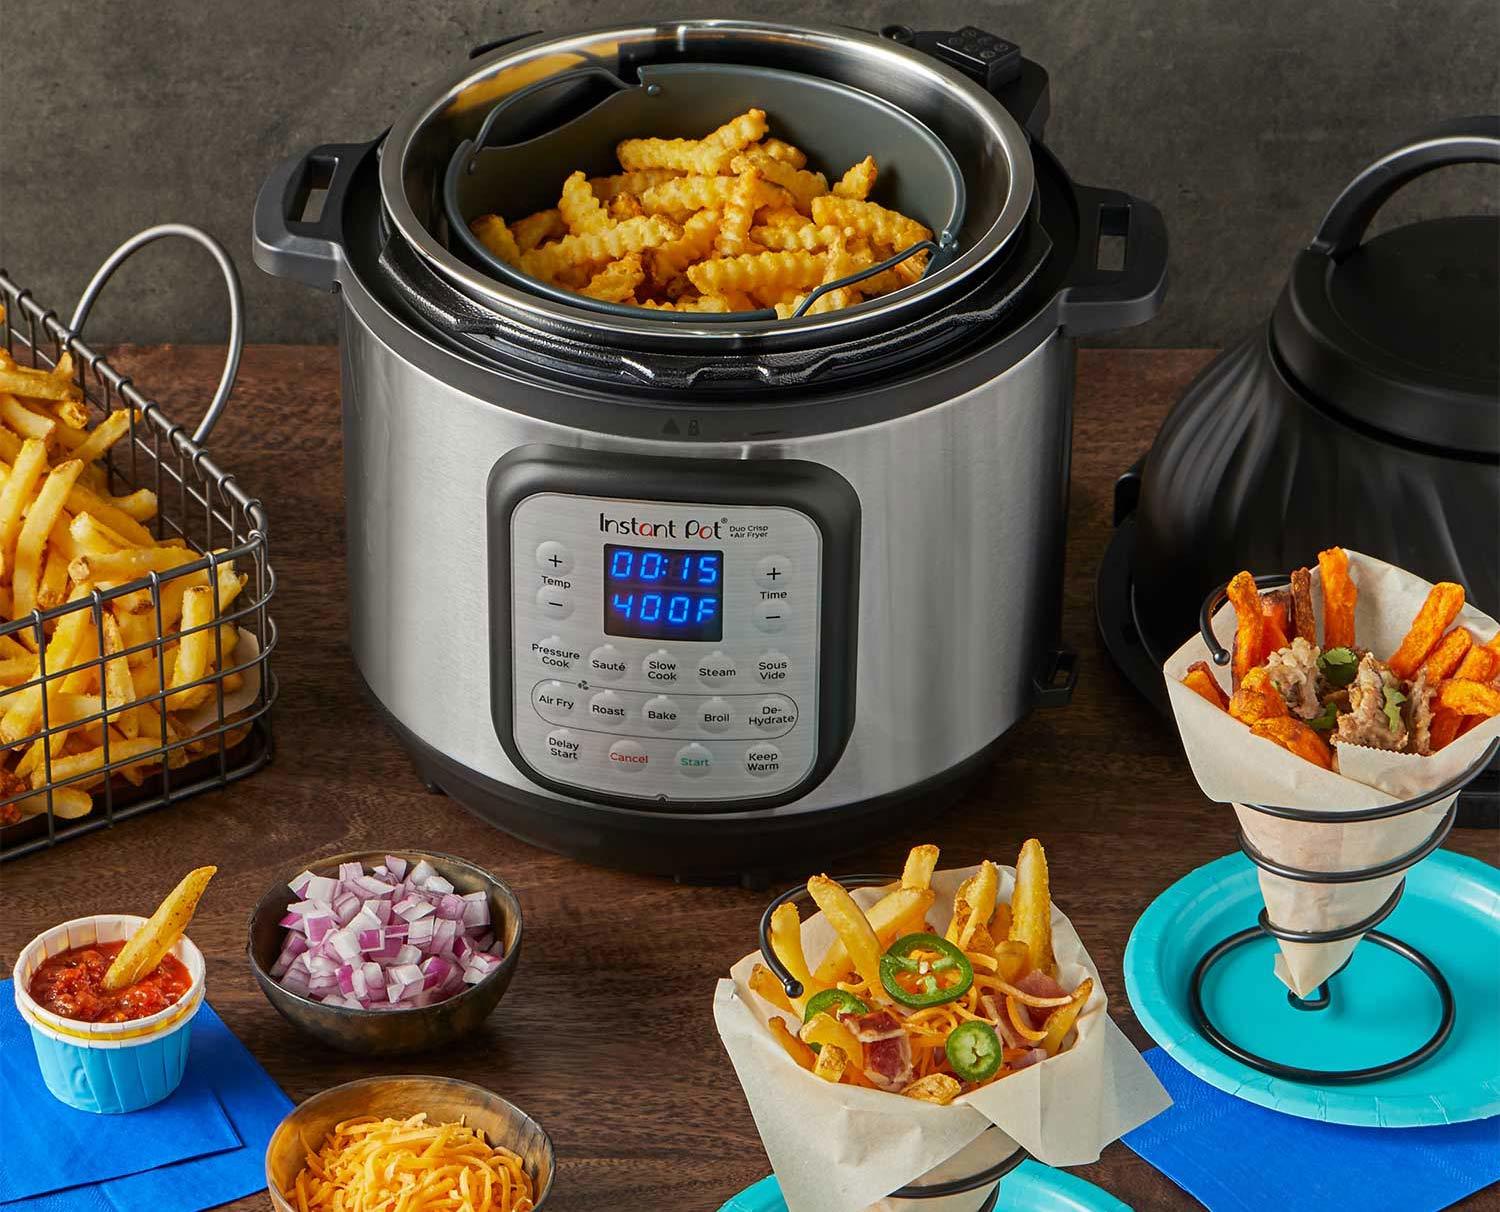 Instant Pot Vortex Plus 6-in-1 Large 6-Quart Air Fryer Oven with  Customizable Smart Cooking Programs, Non-stick and Dishwasher-Safe Basket,  Includes Free App over 1900 Recipes, Stainless Steel 